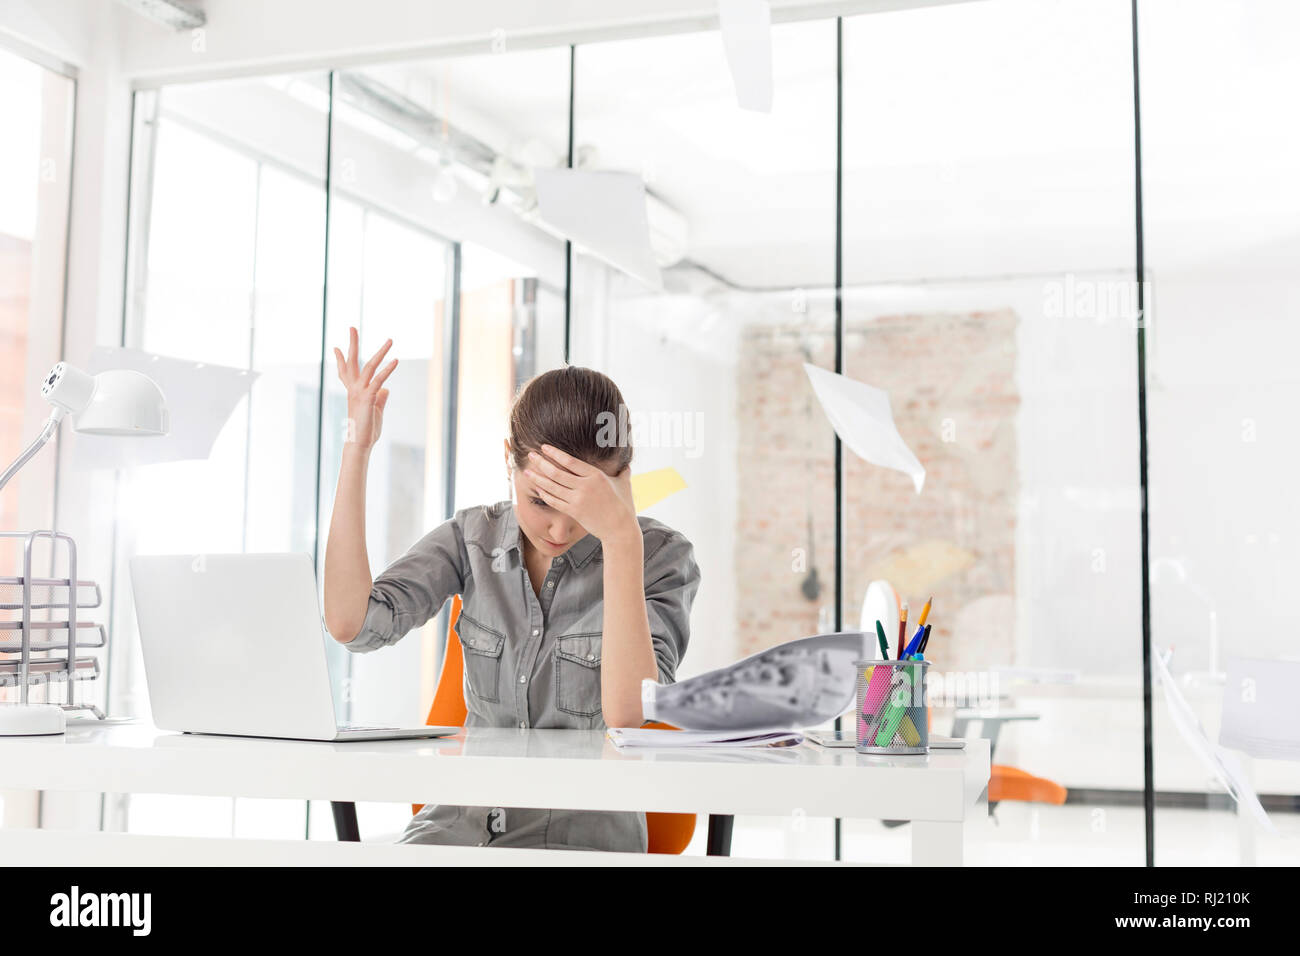 Overworked businesswoman throwing documents at desk in office Stock Photo